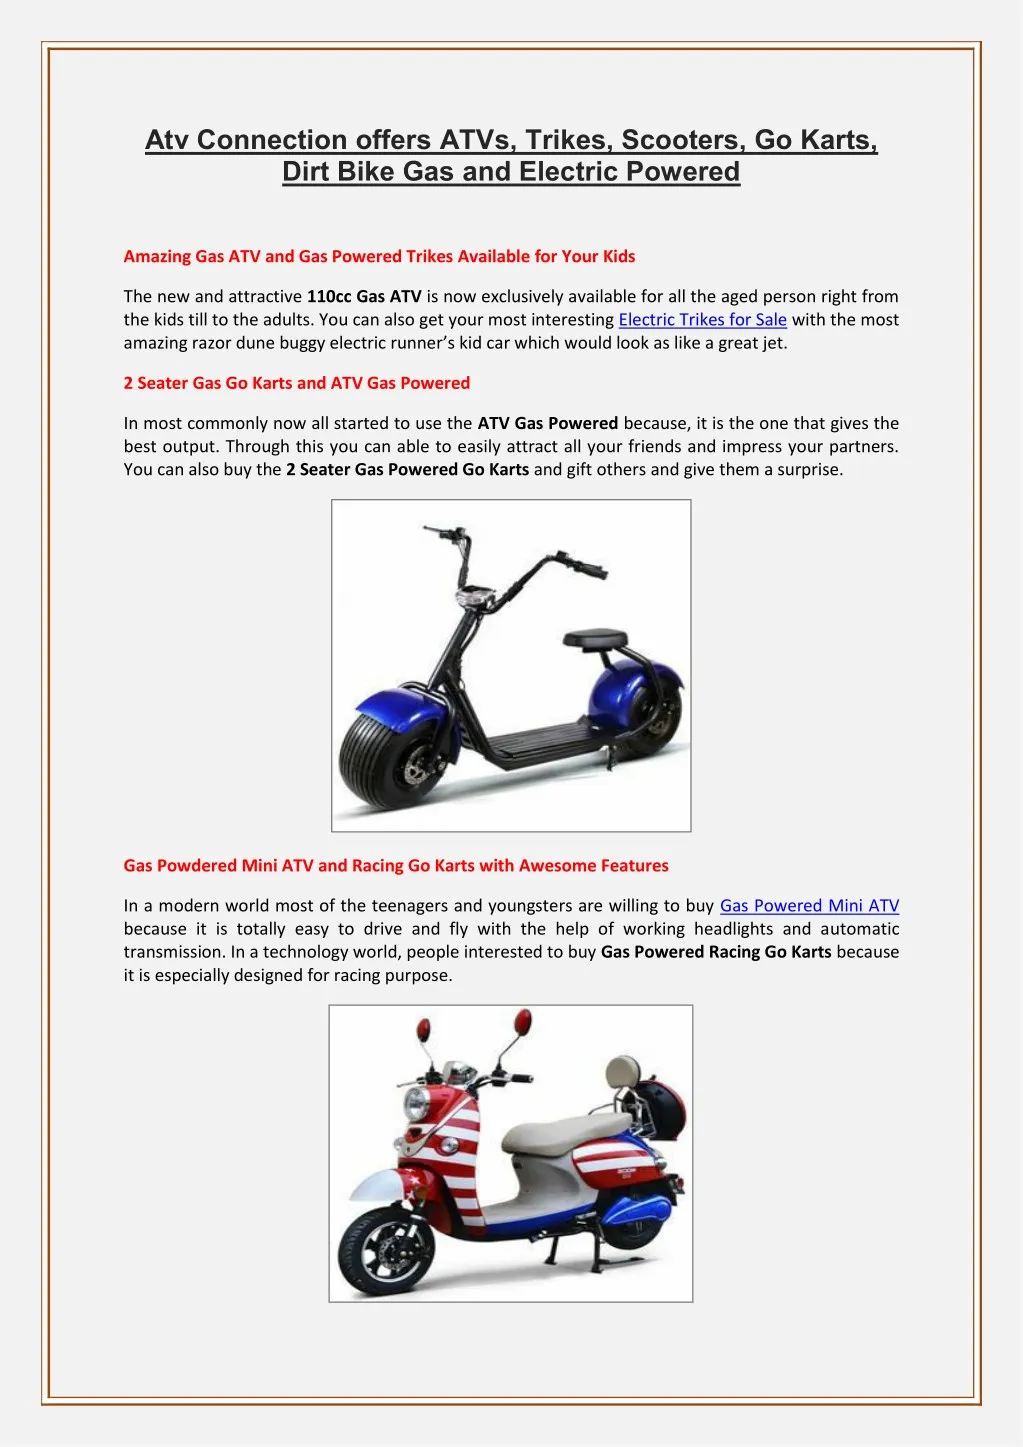 atv connection offers atvs trikes scooters